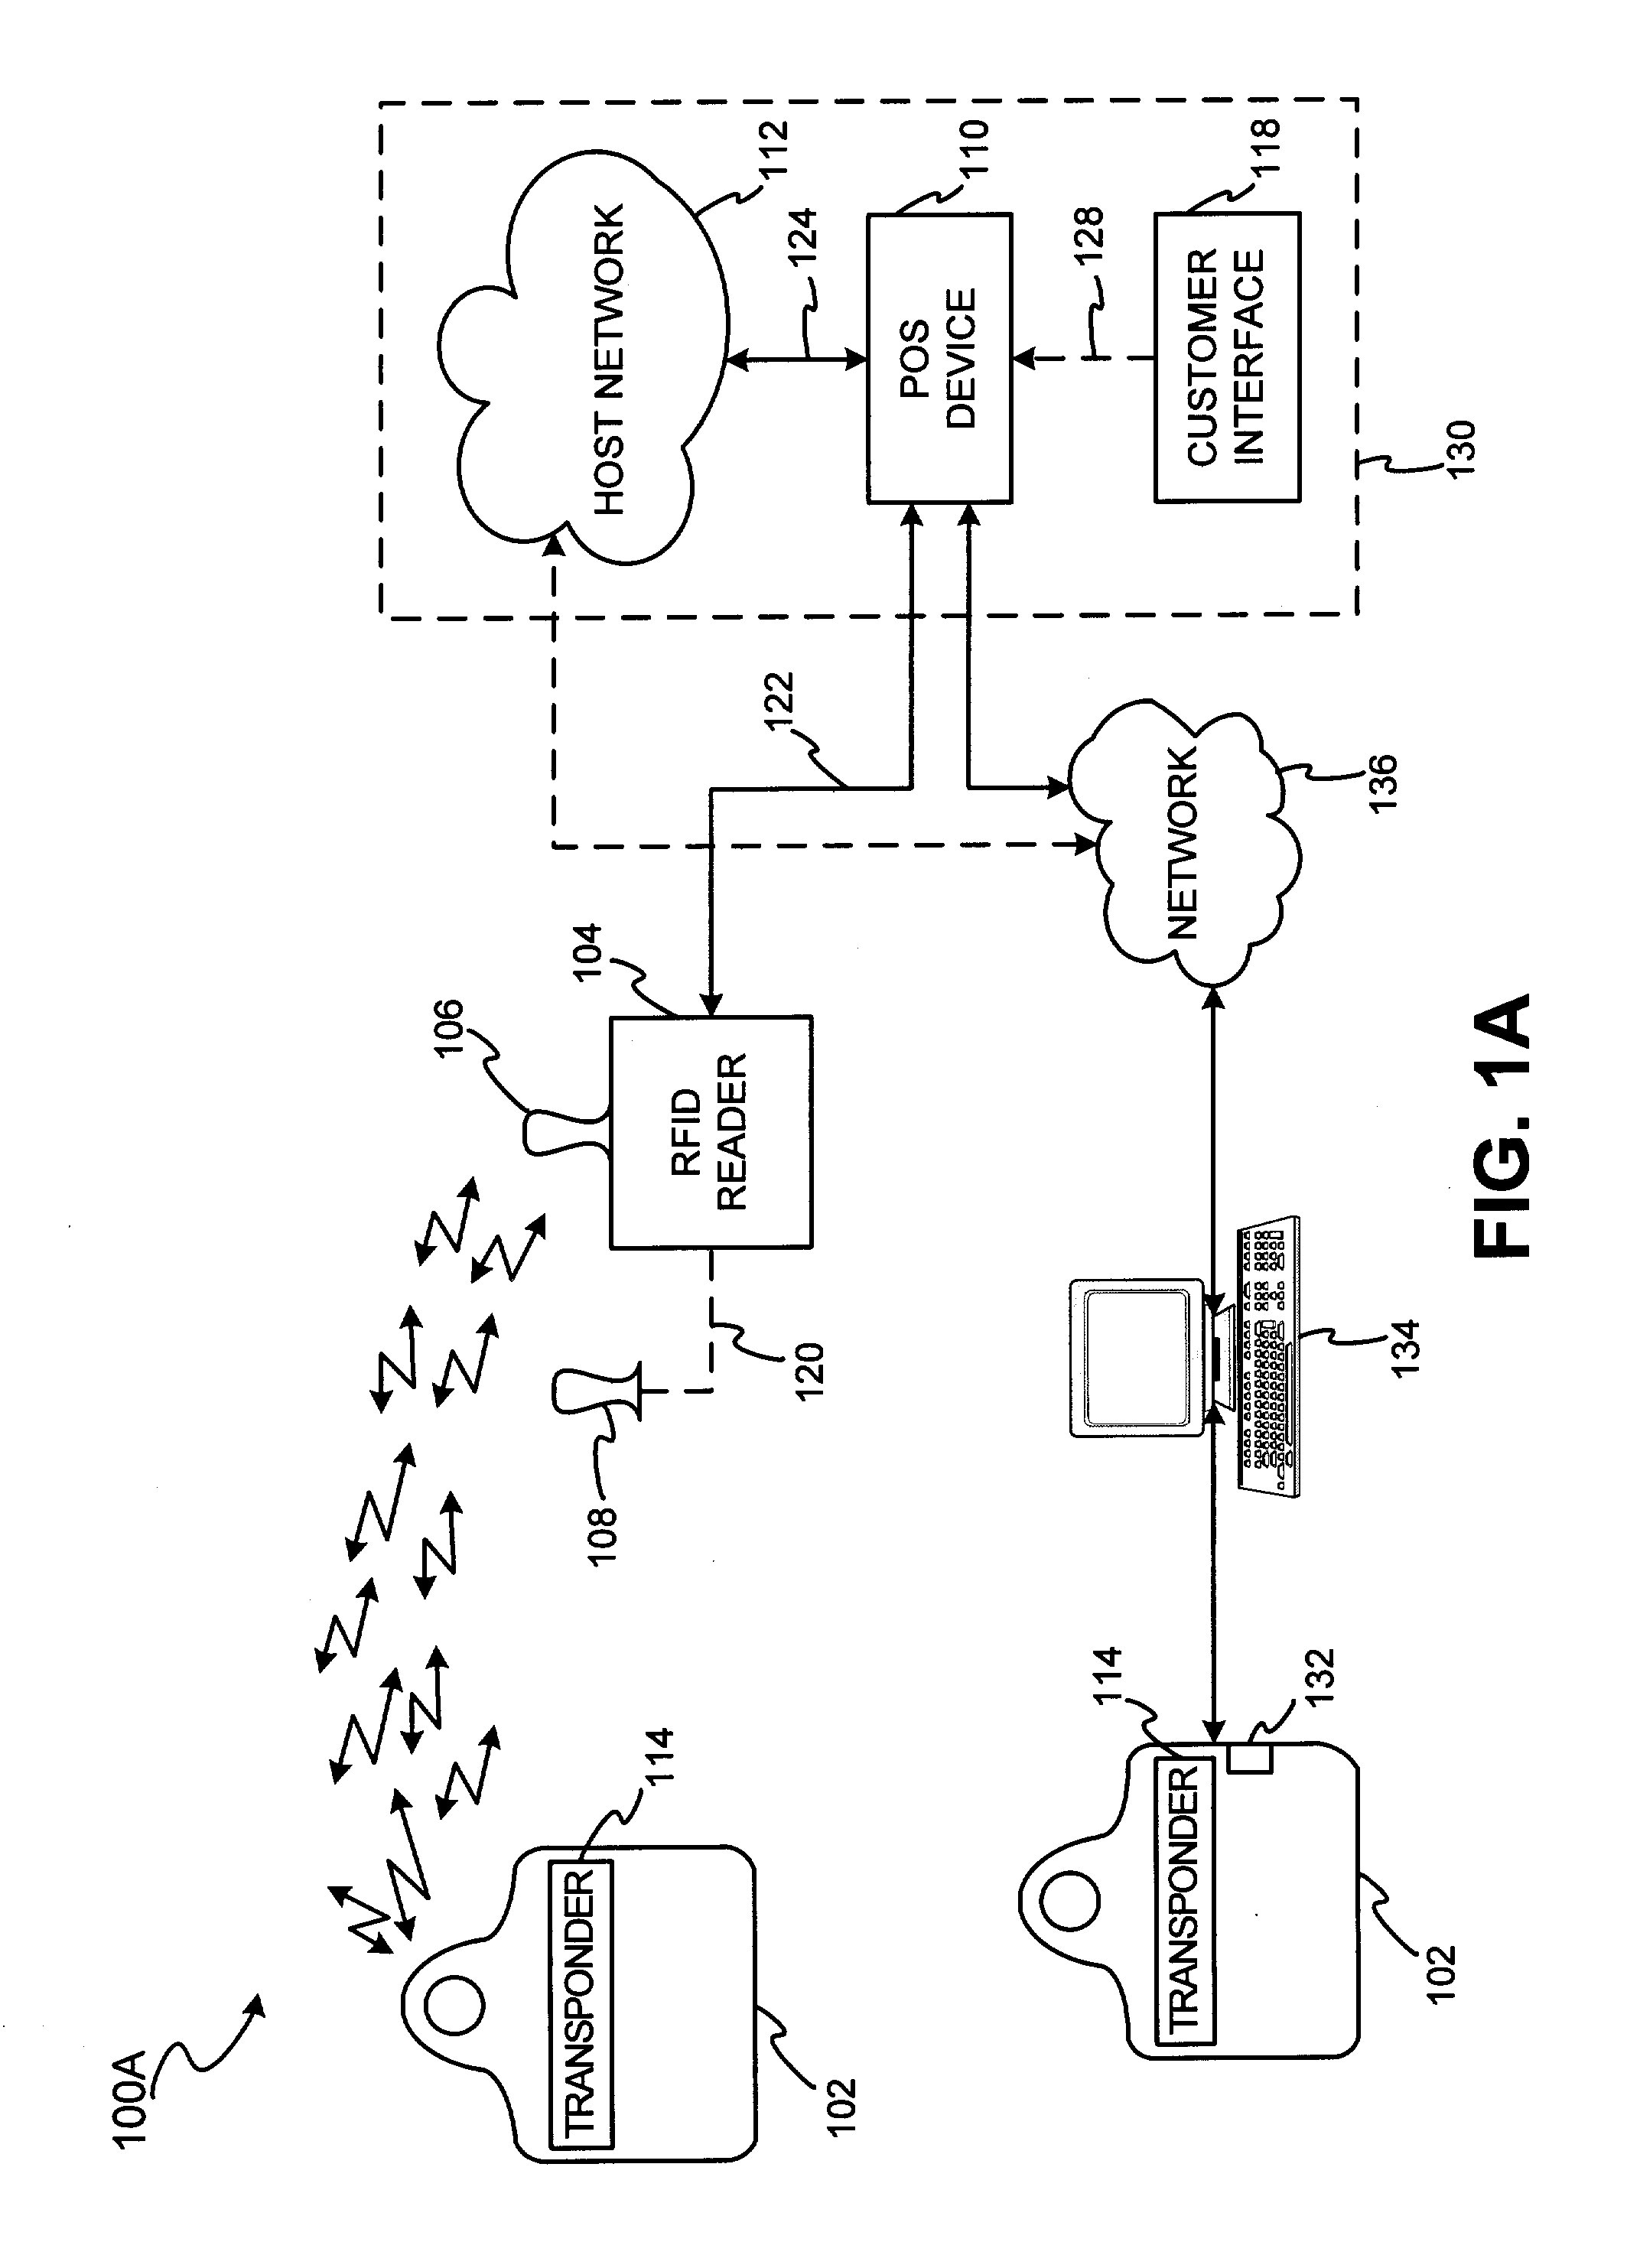 Method and system for a travel-related multi-function fob